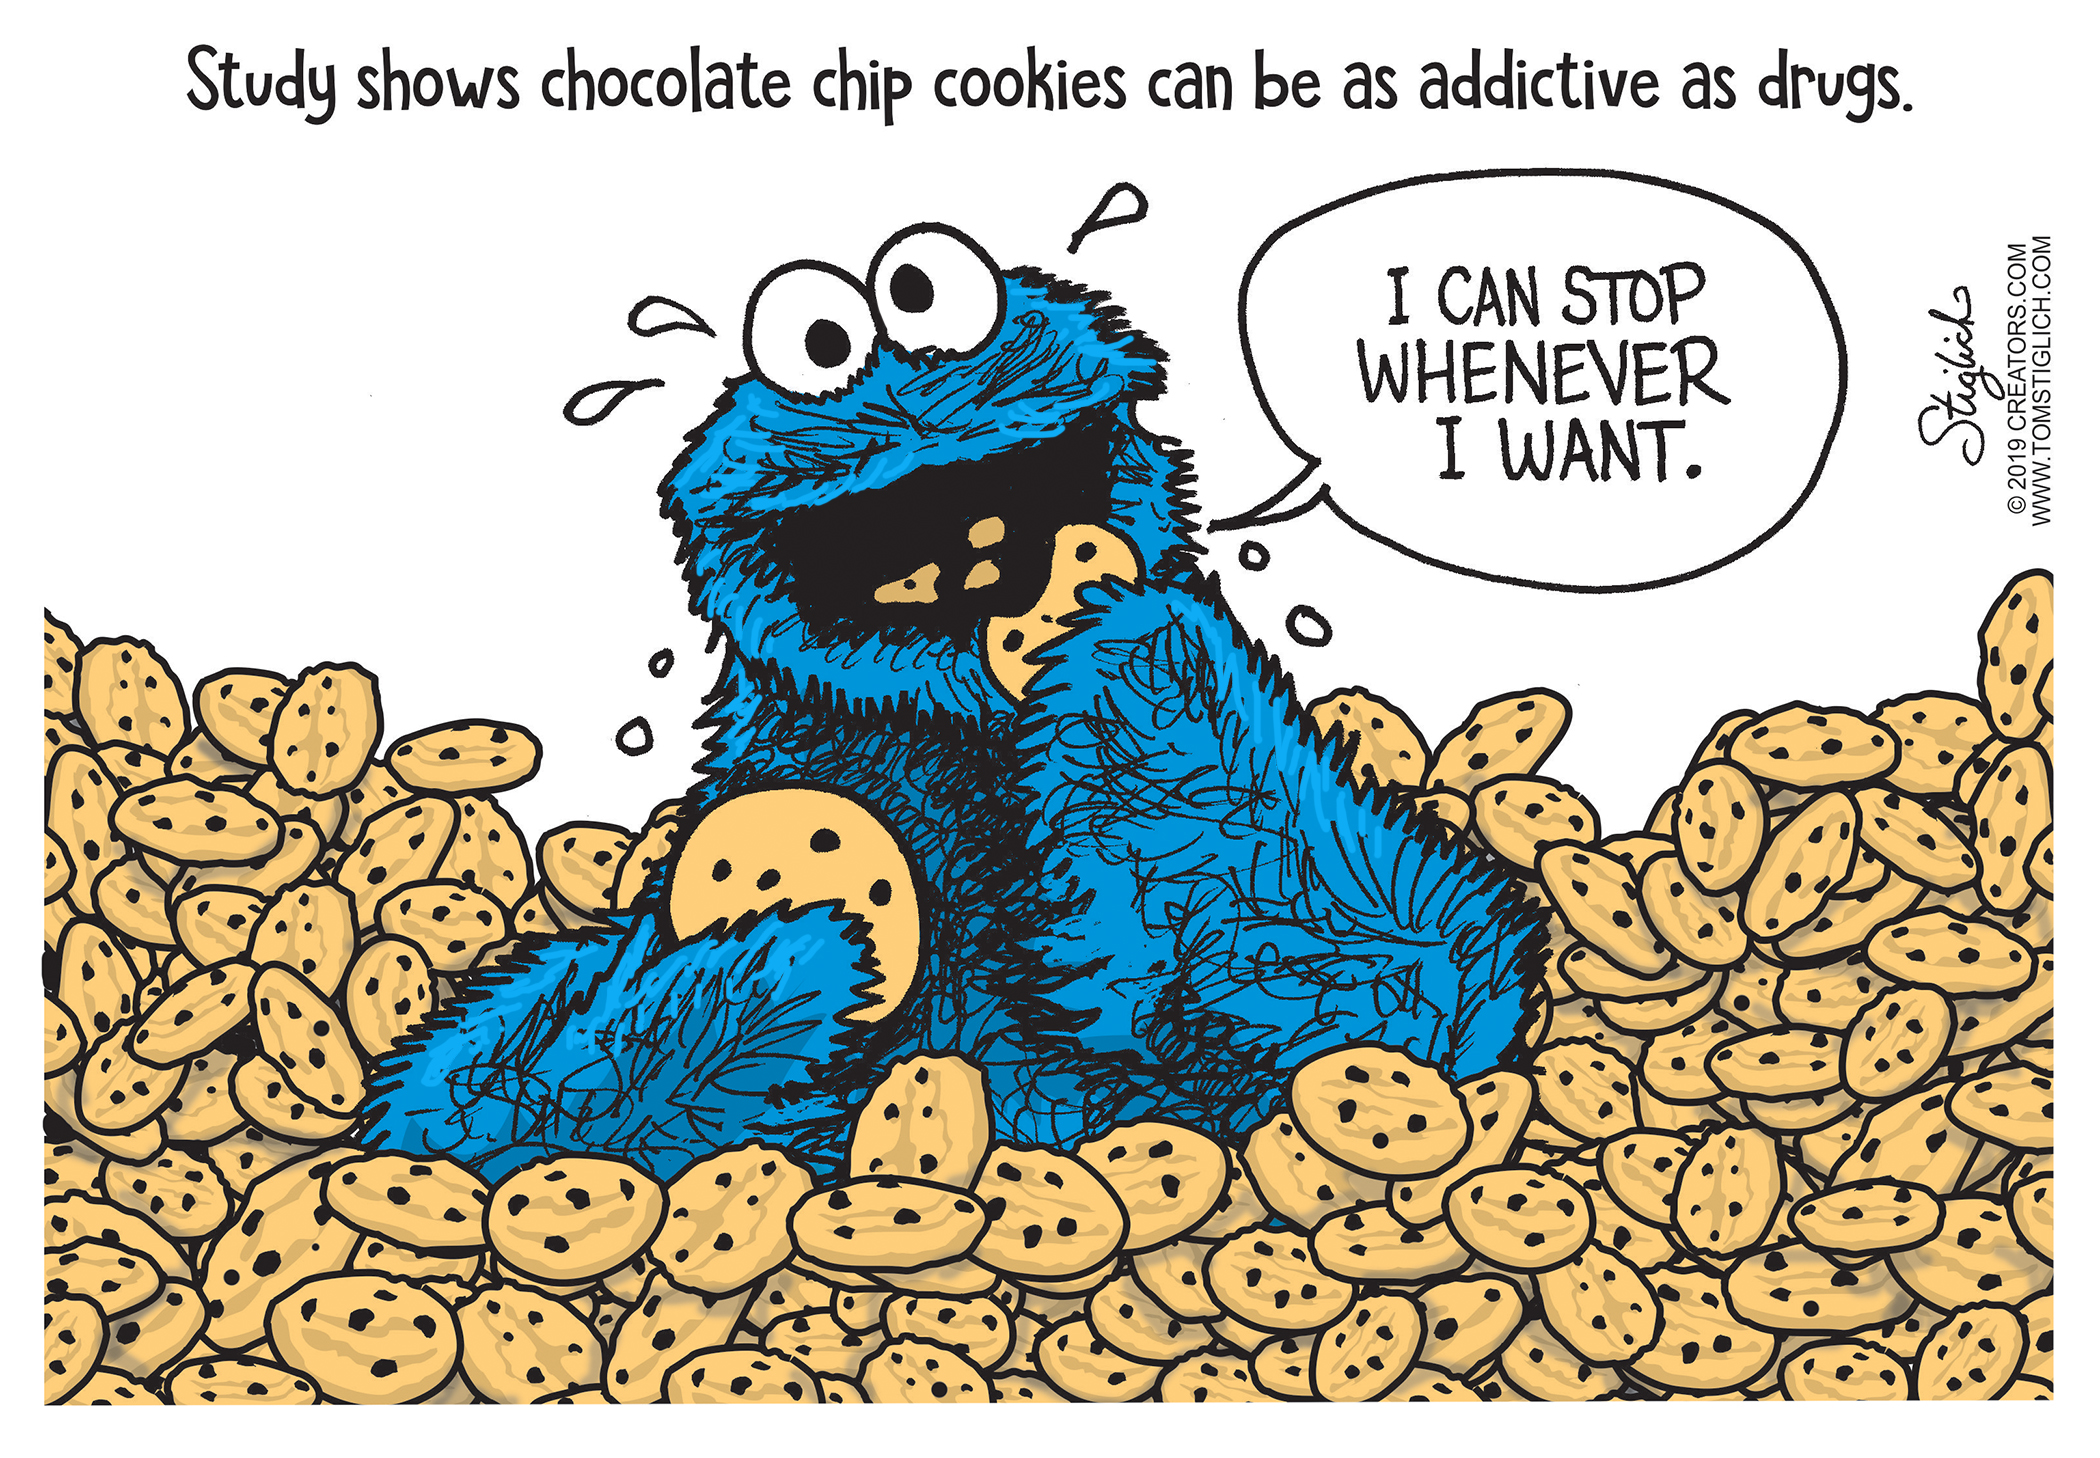 Editorial Cartoon . Addicted Chocolate Chip Cookie Monster